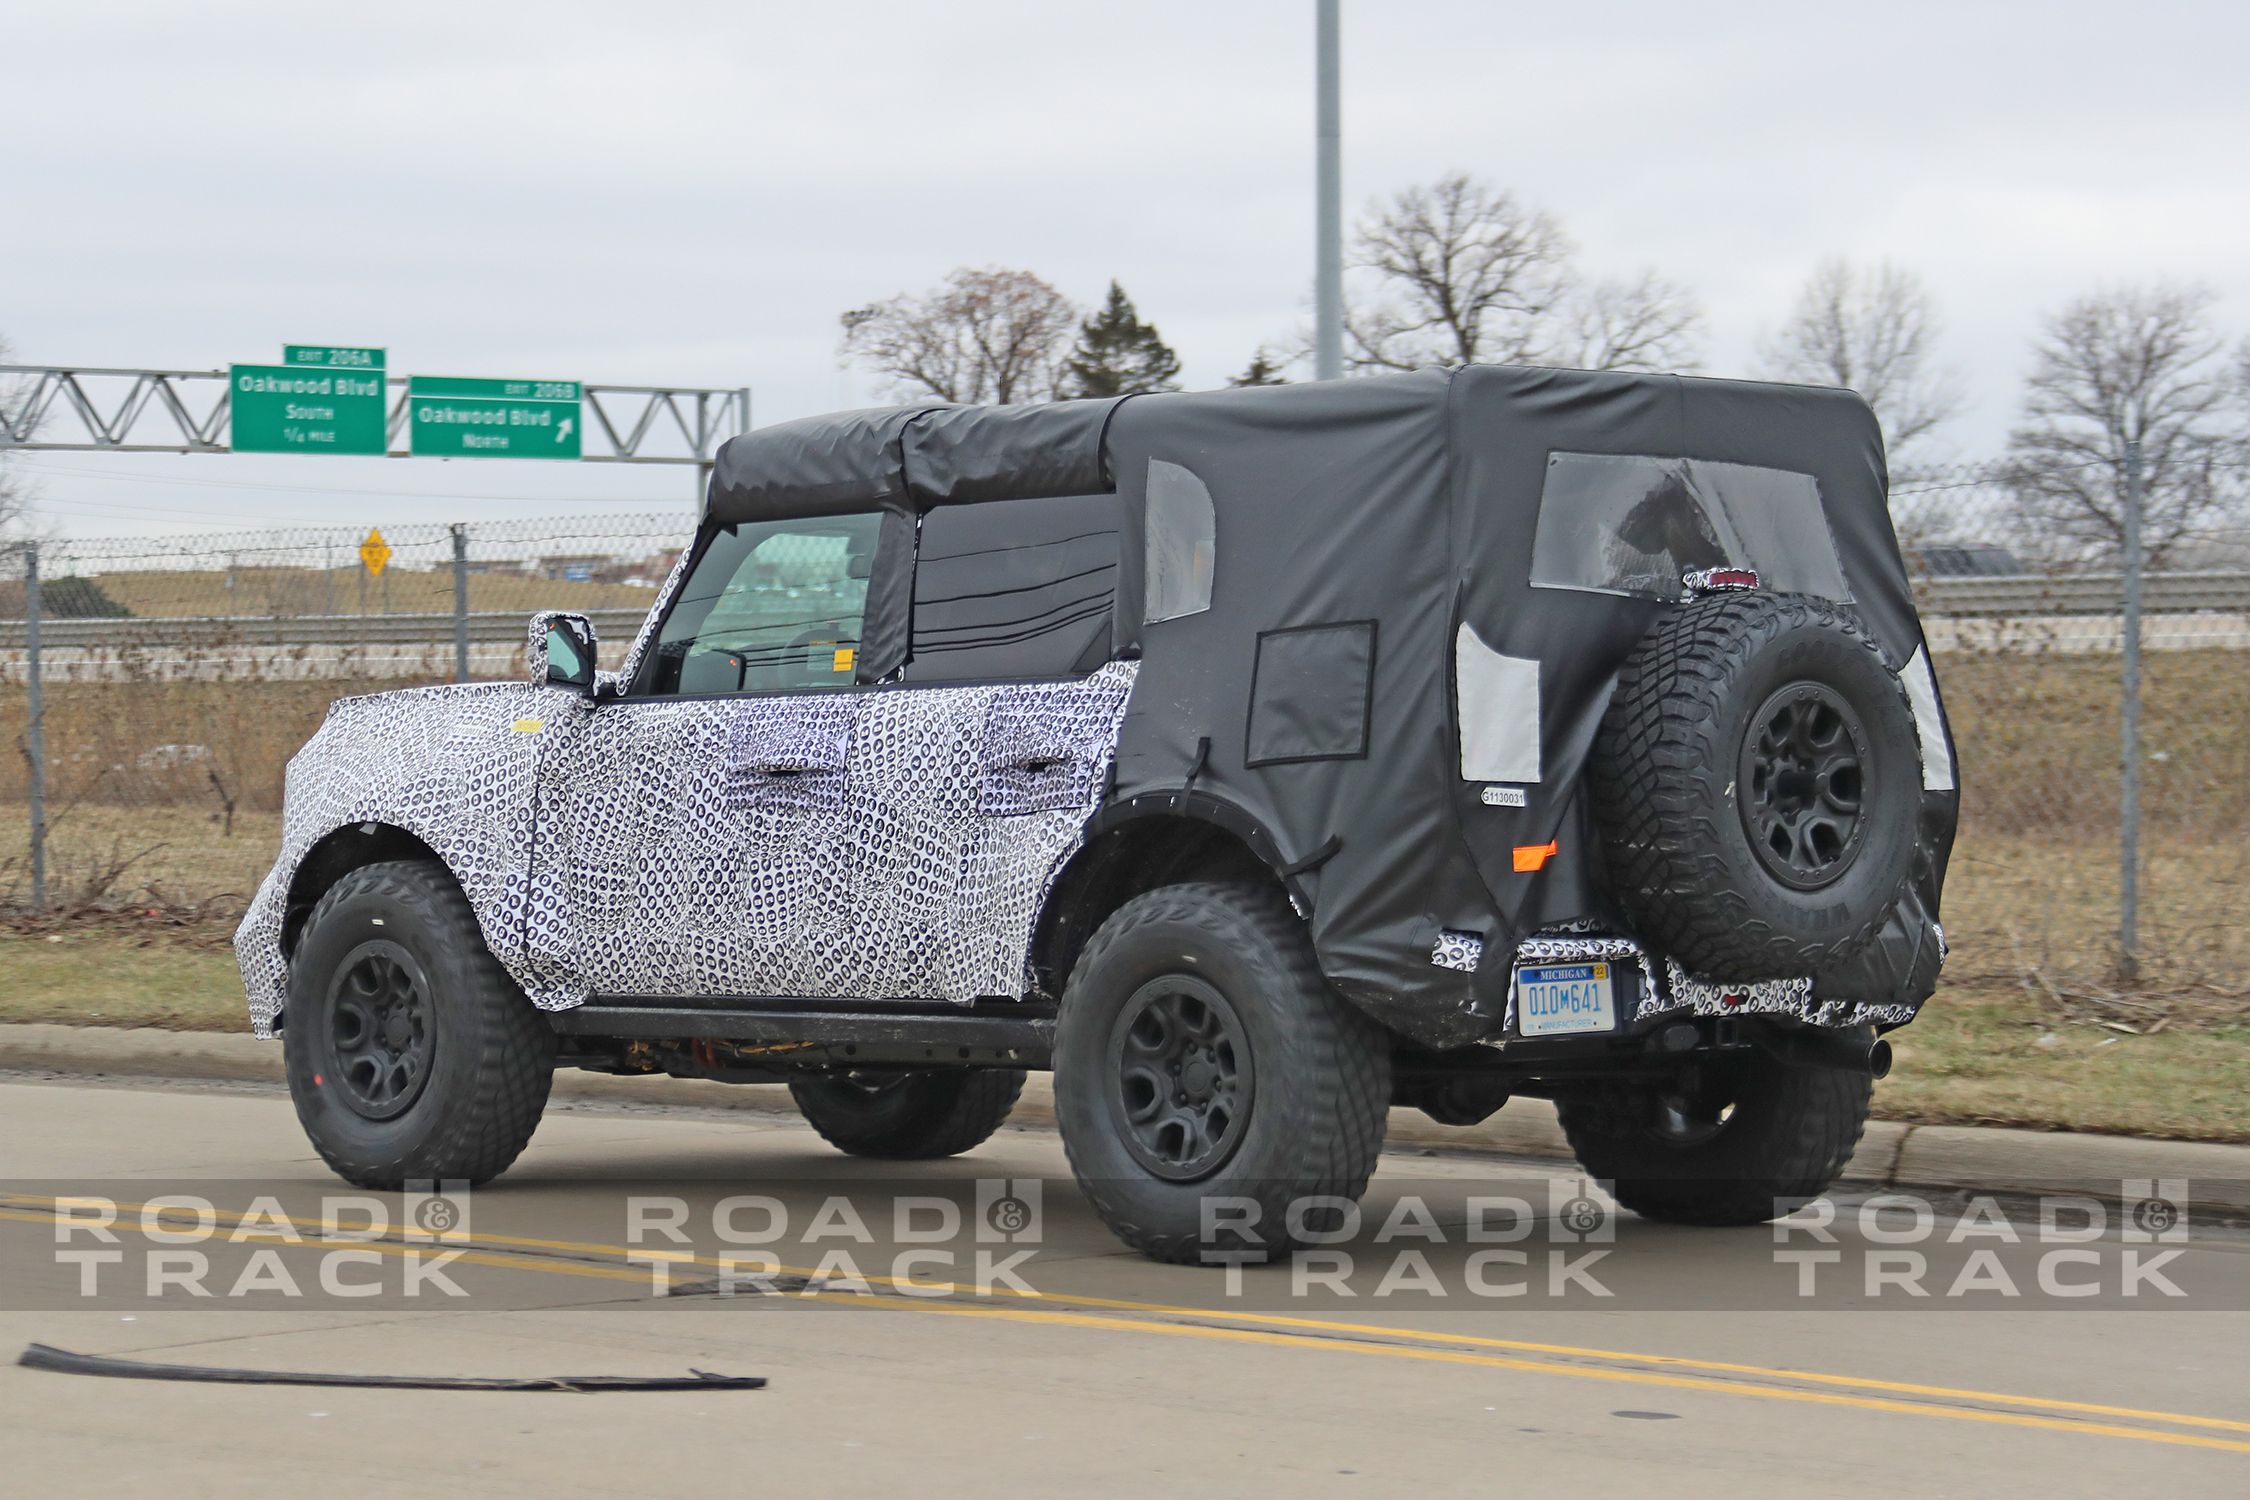 2021 Ford Bronco Spy Shots on the Road - Bronco Prototype Spotted